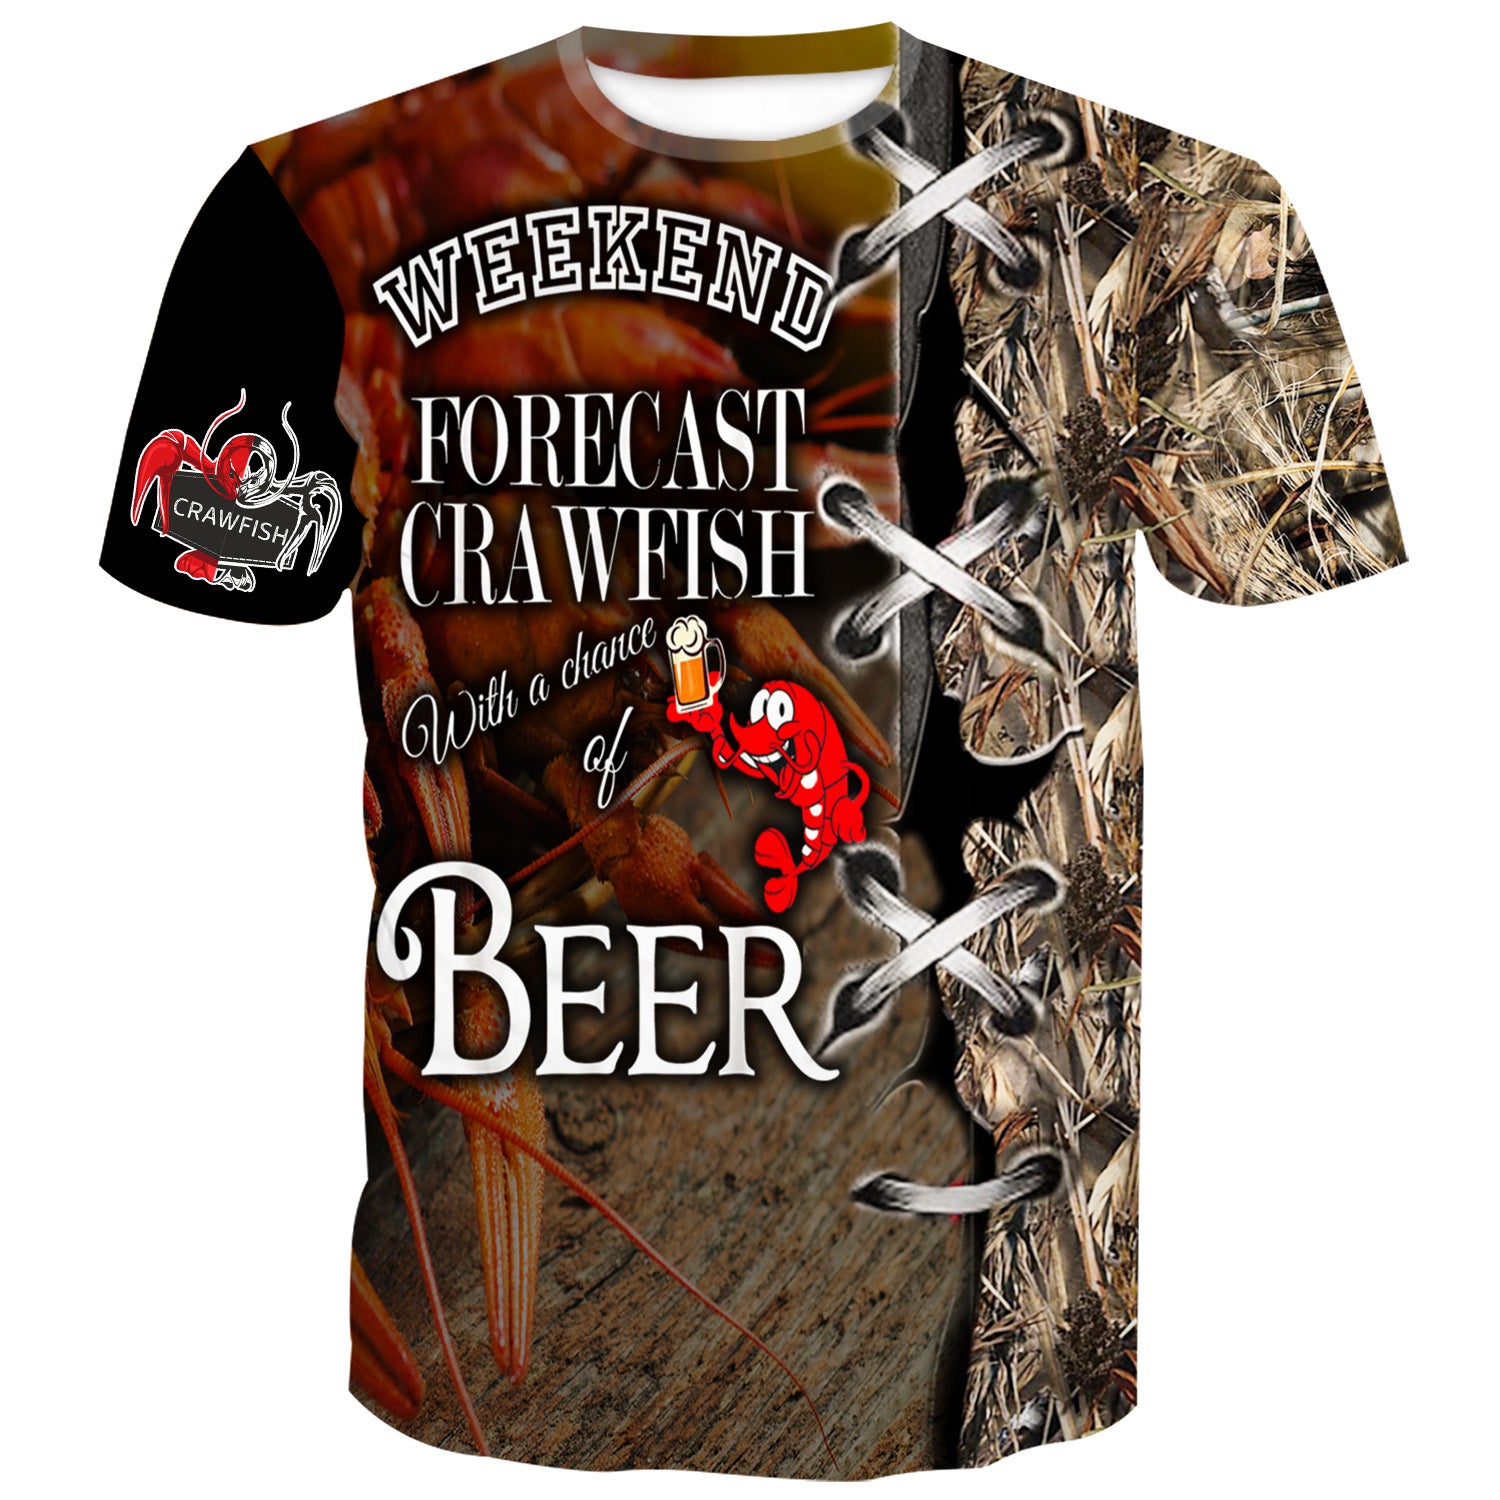 Crawfish with a chance of beer - T-Shirt